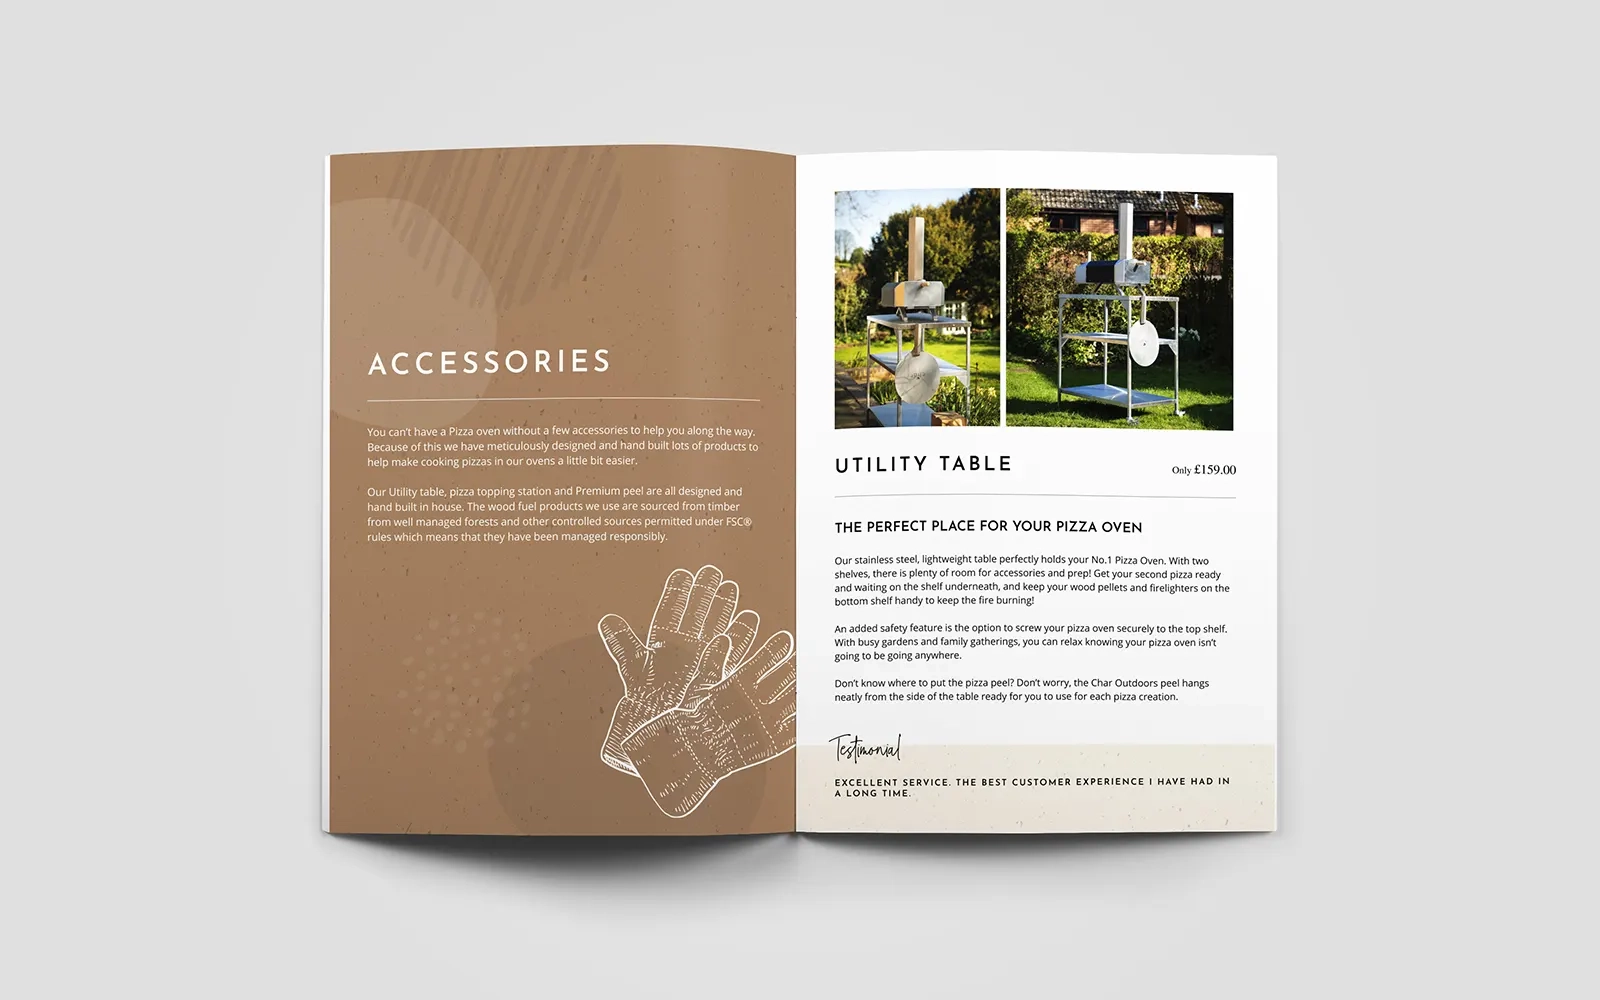 A two page spread of the brochure showing the 'accessories' divider page and photos and information about the utility table on offer